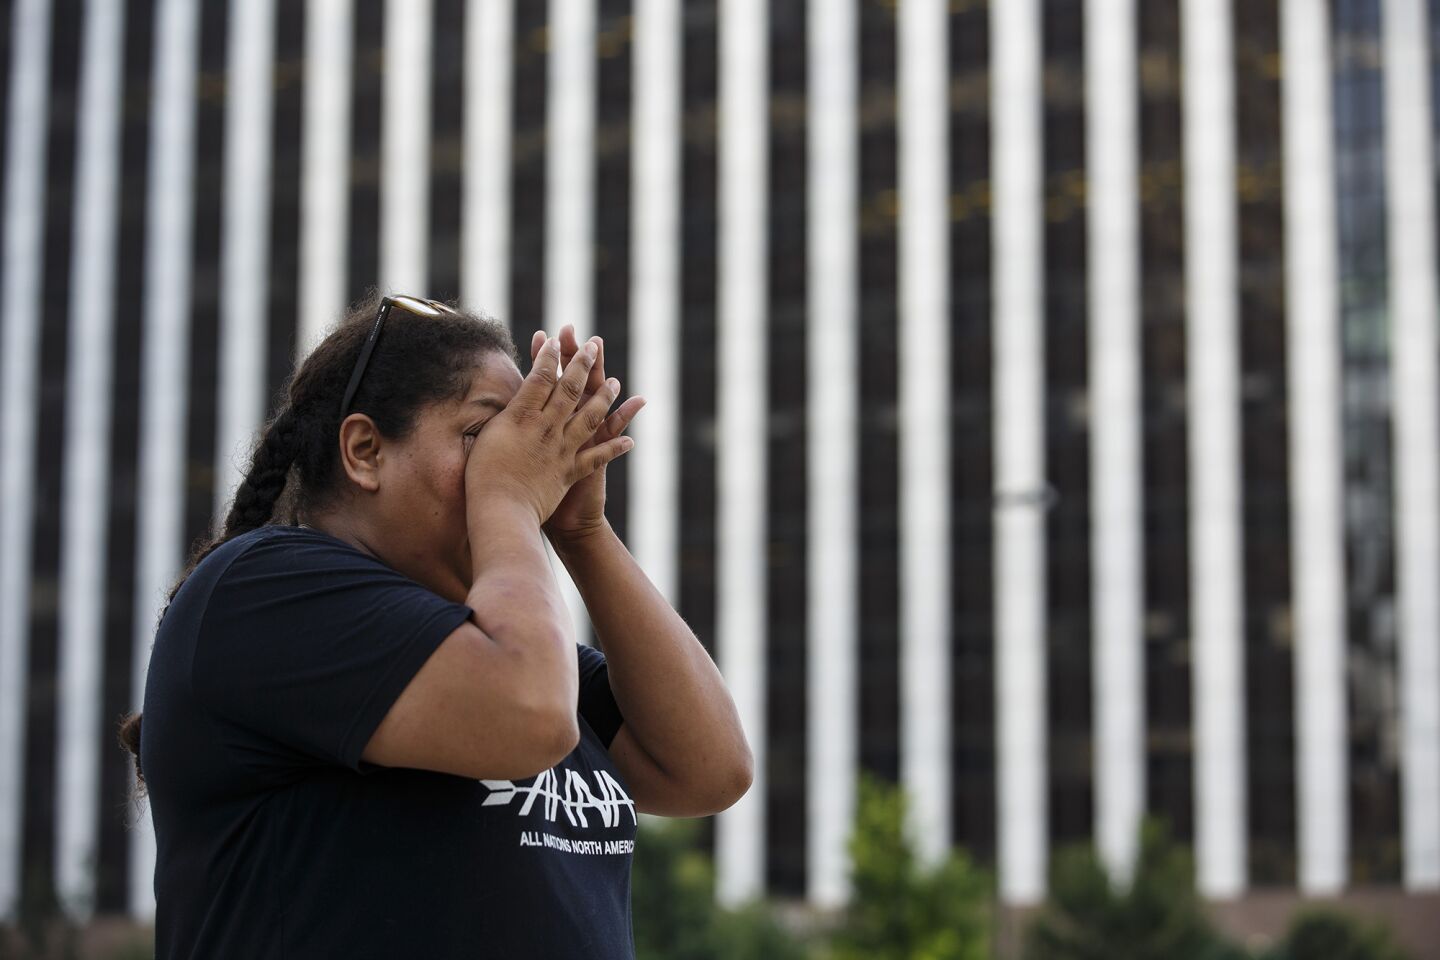 A woman weeps at a memorial outside the crime scene where 5 police officers were killed and 7 more wounded, in Dallas, Texas.